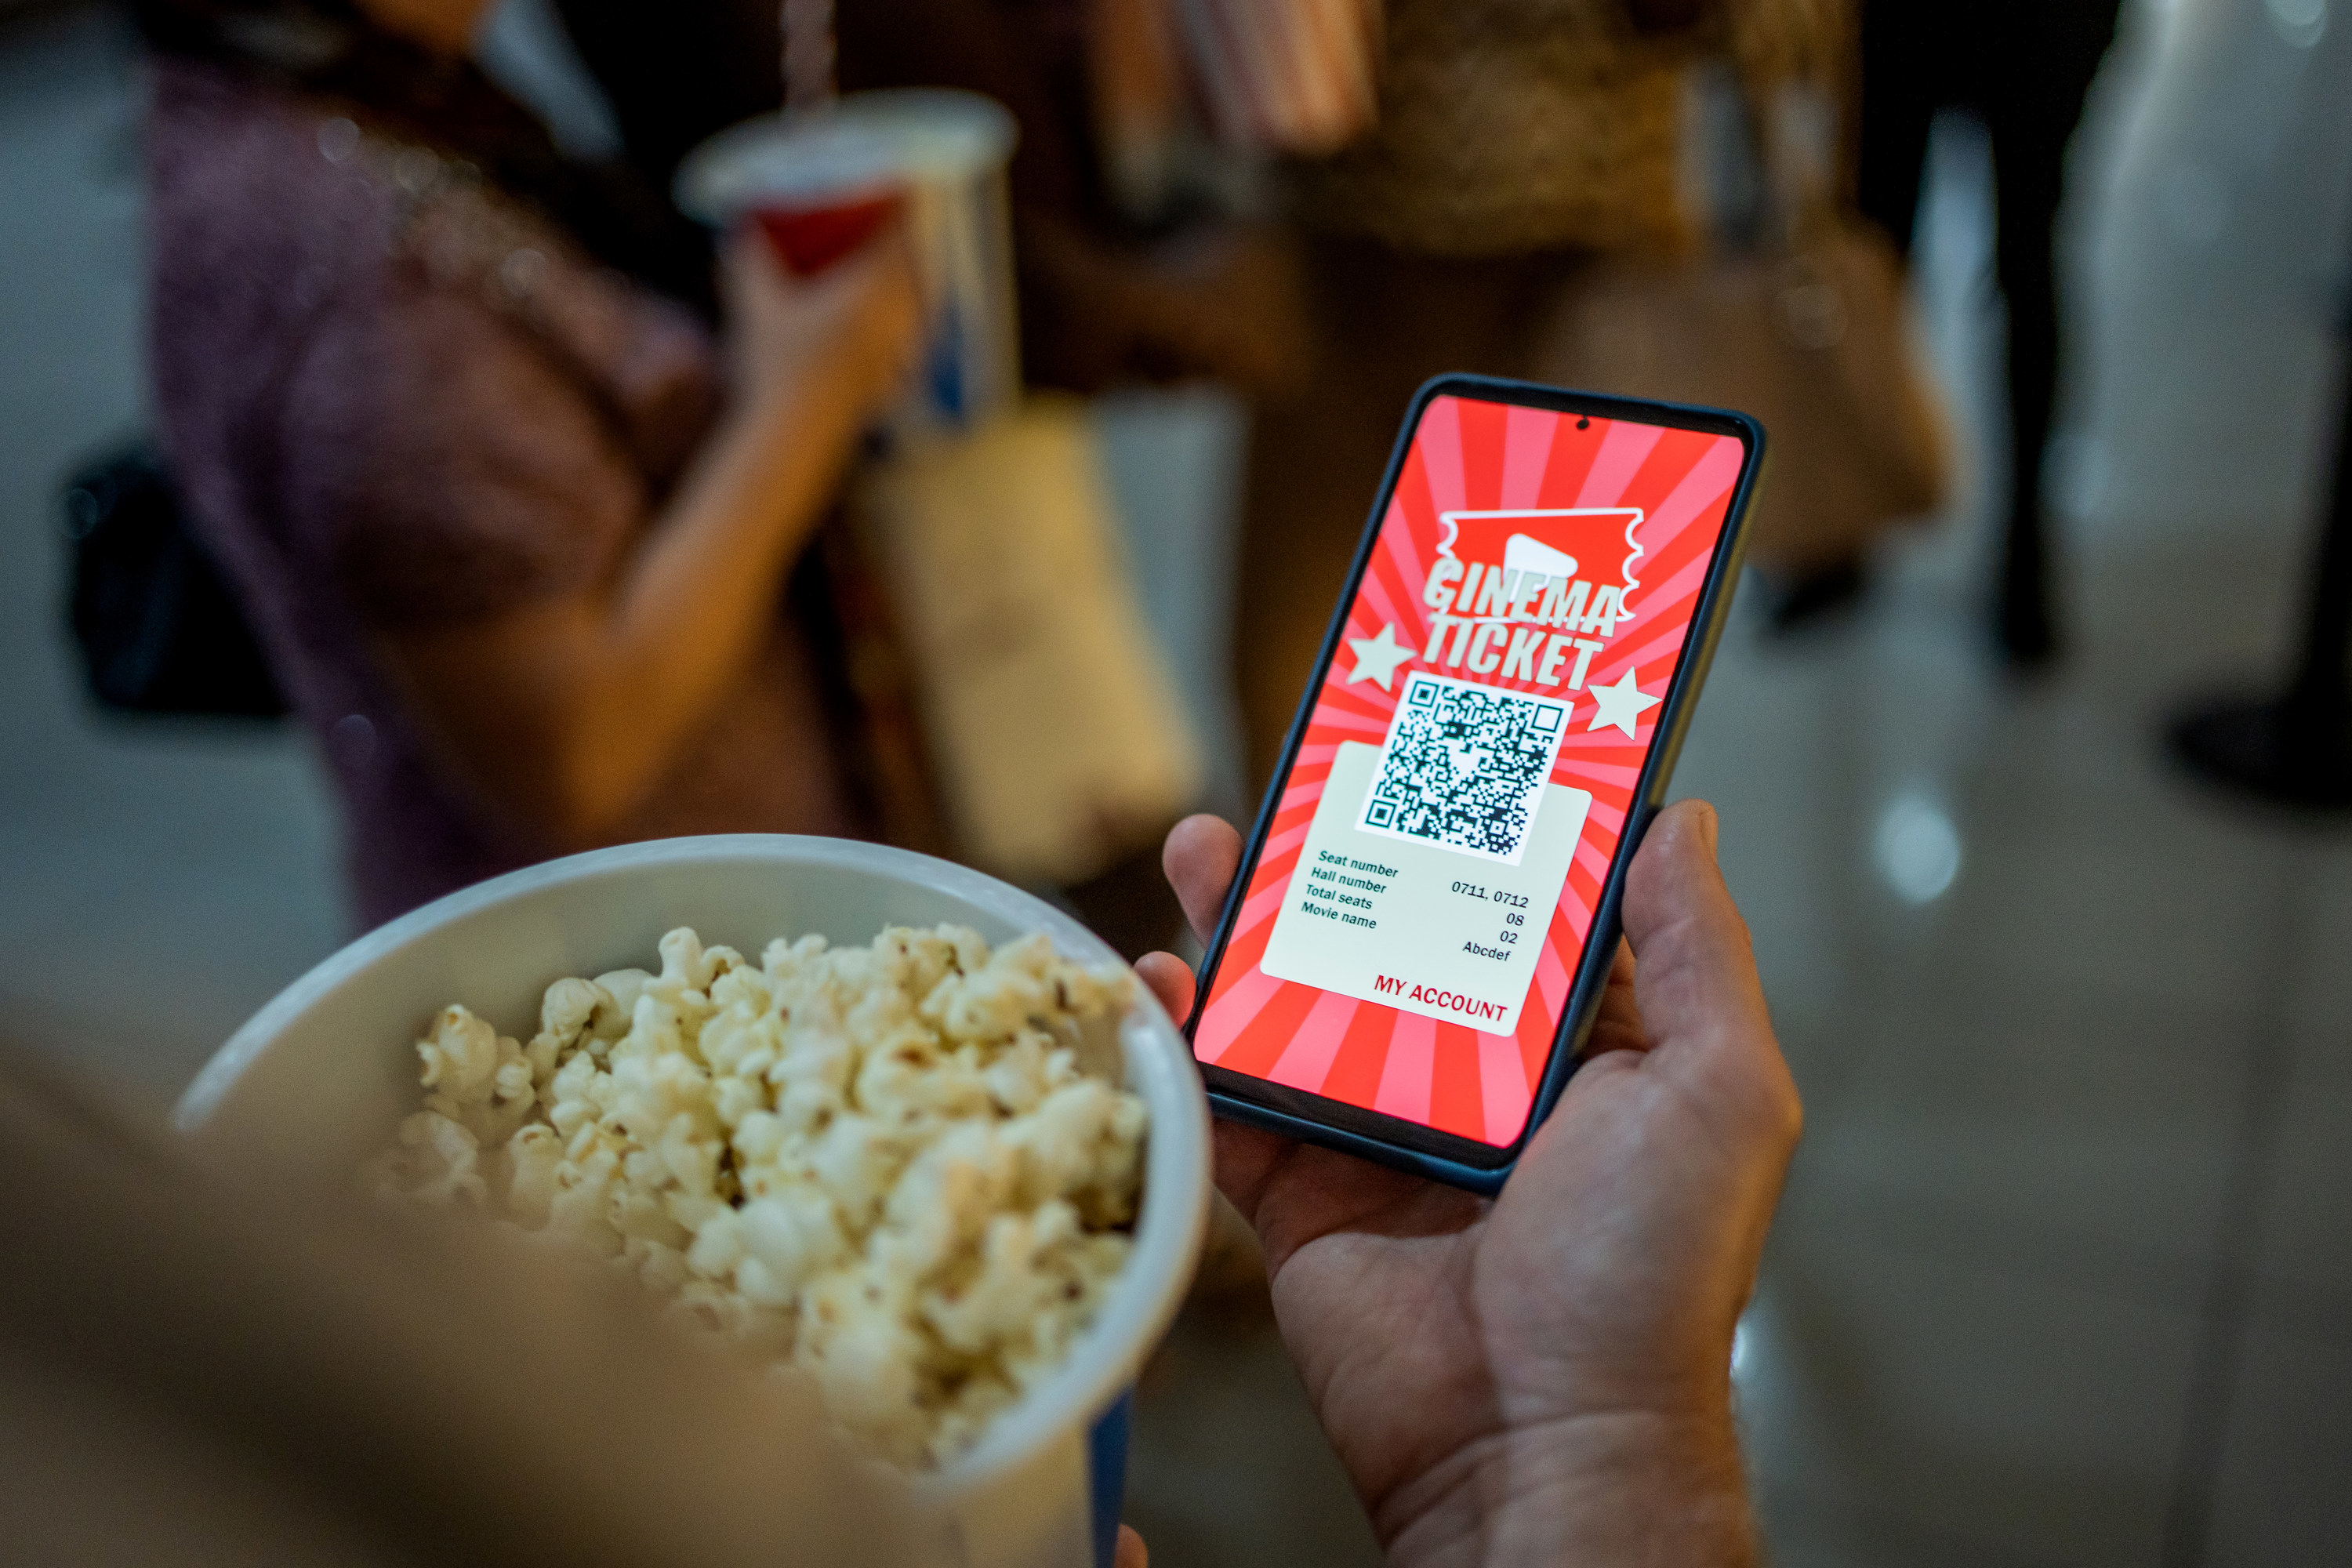 Someone holding popcorn and a digital movie ticket